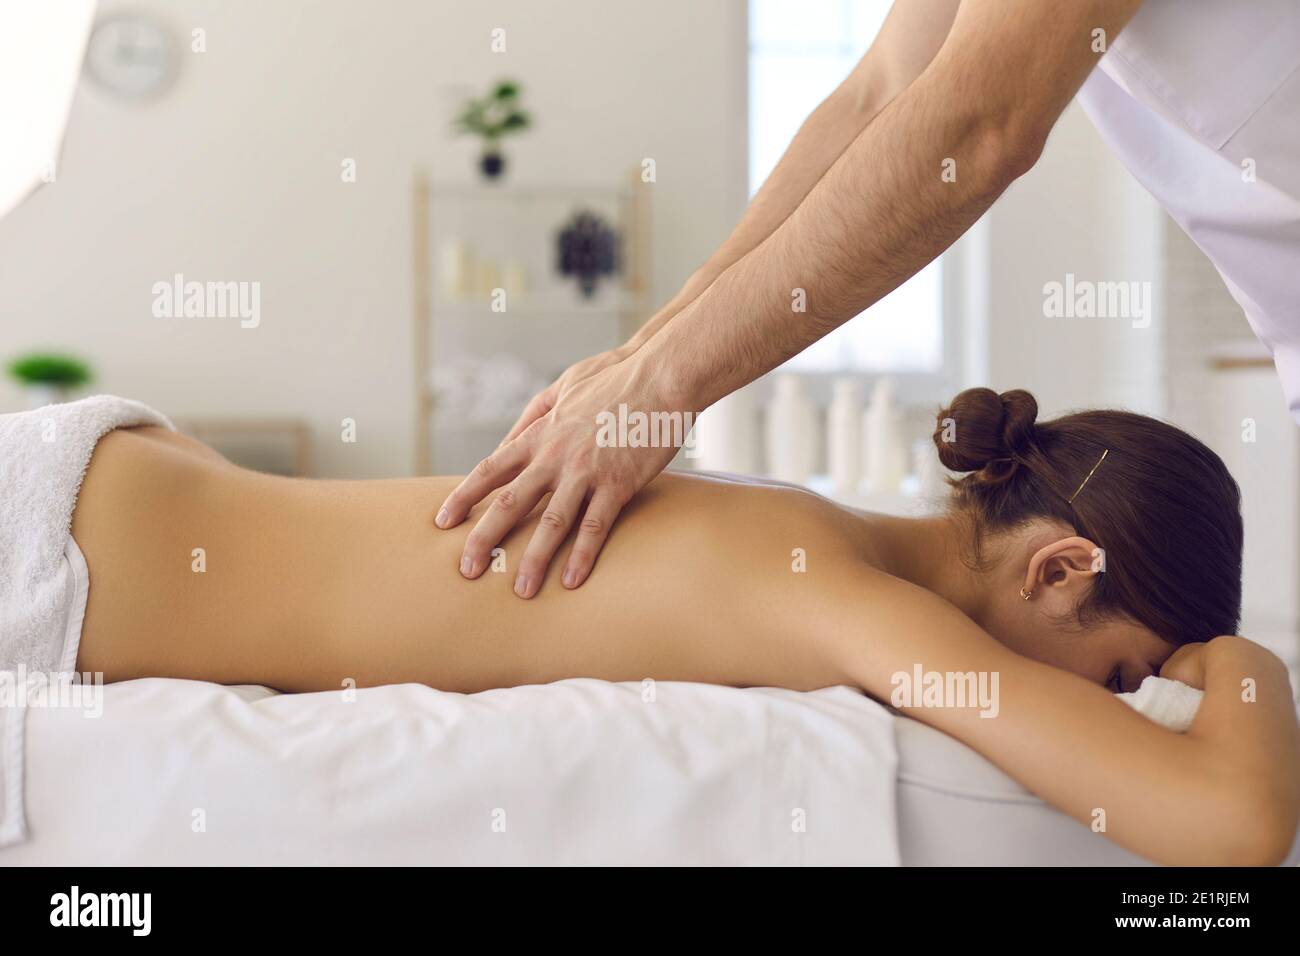 Masseur making acupressure or relaxing massage of back woman Stock Photo